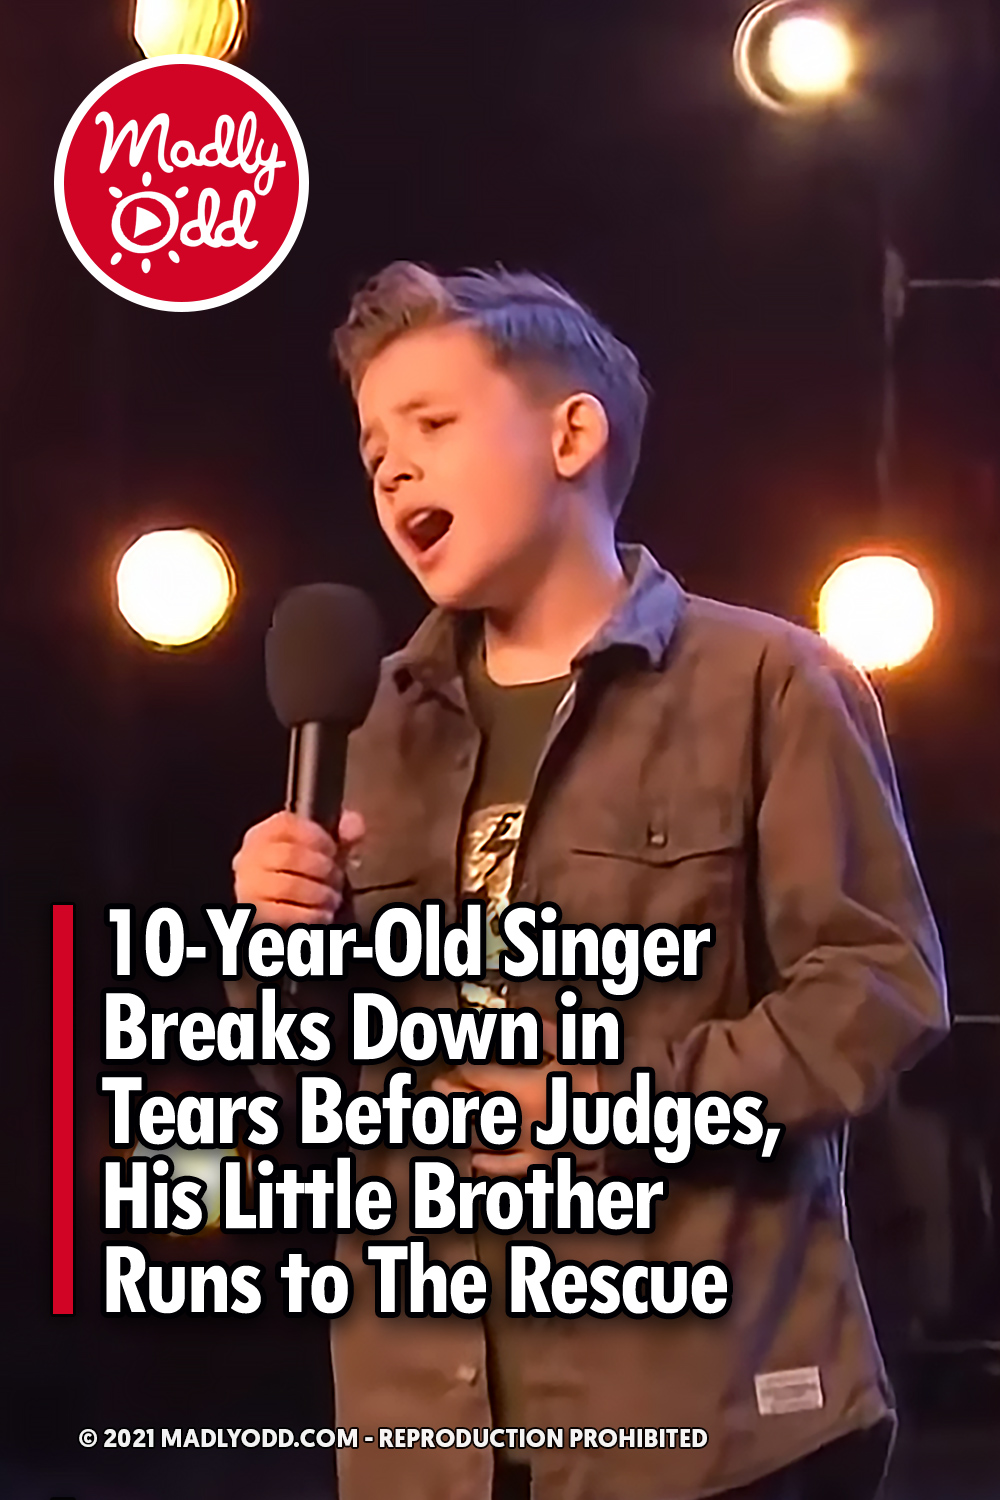 10-Year-Old Singer Breaks Down in Tears Before Judges, His Little Brother Runs to The Rescue